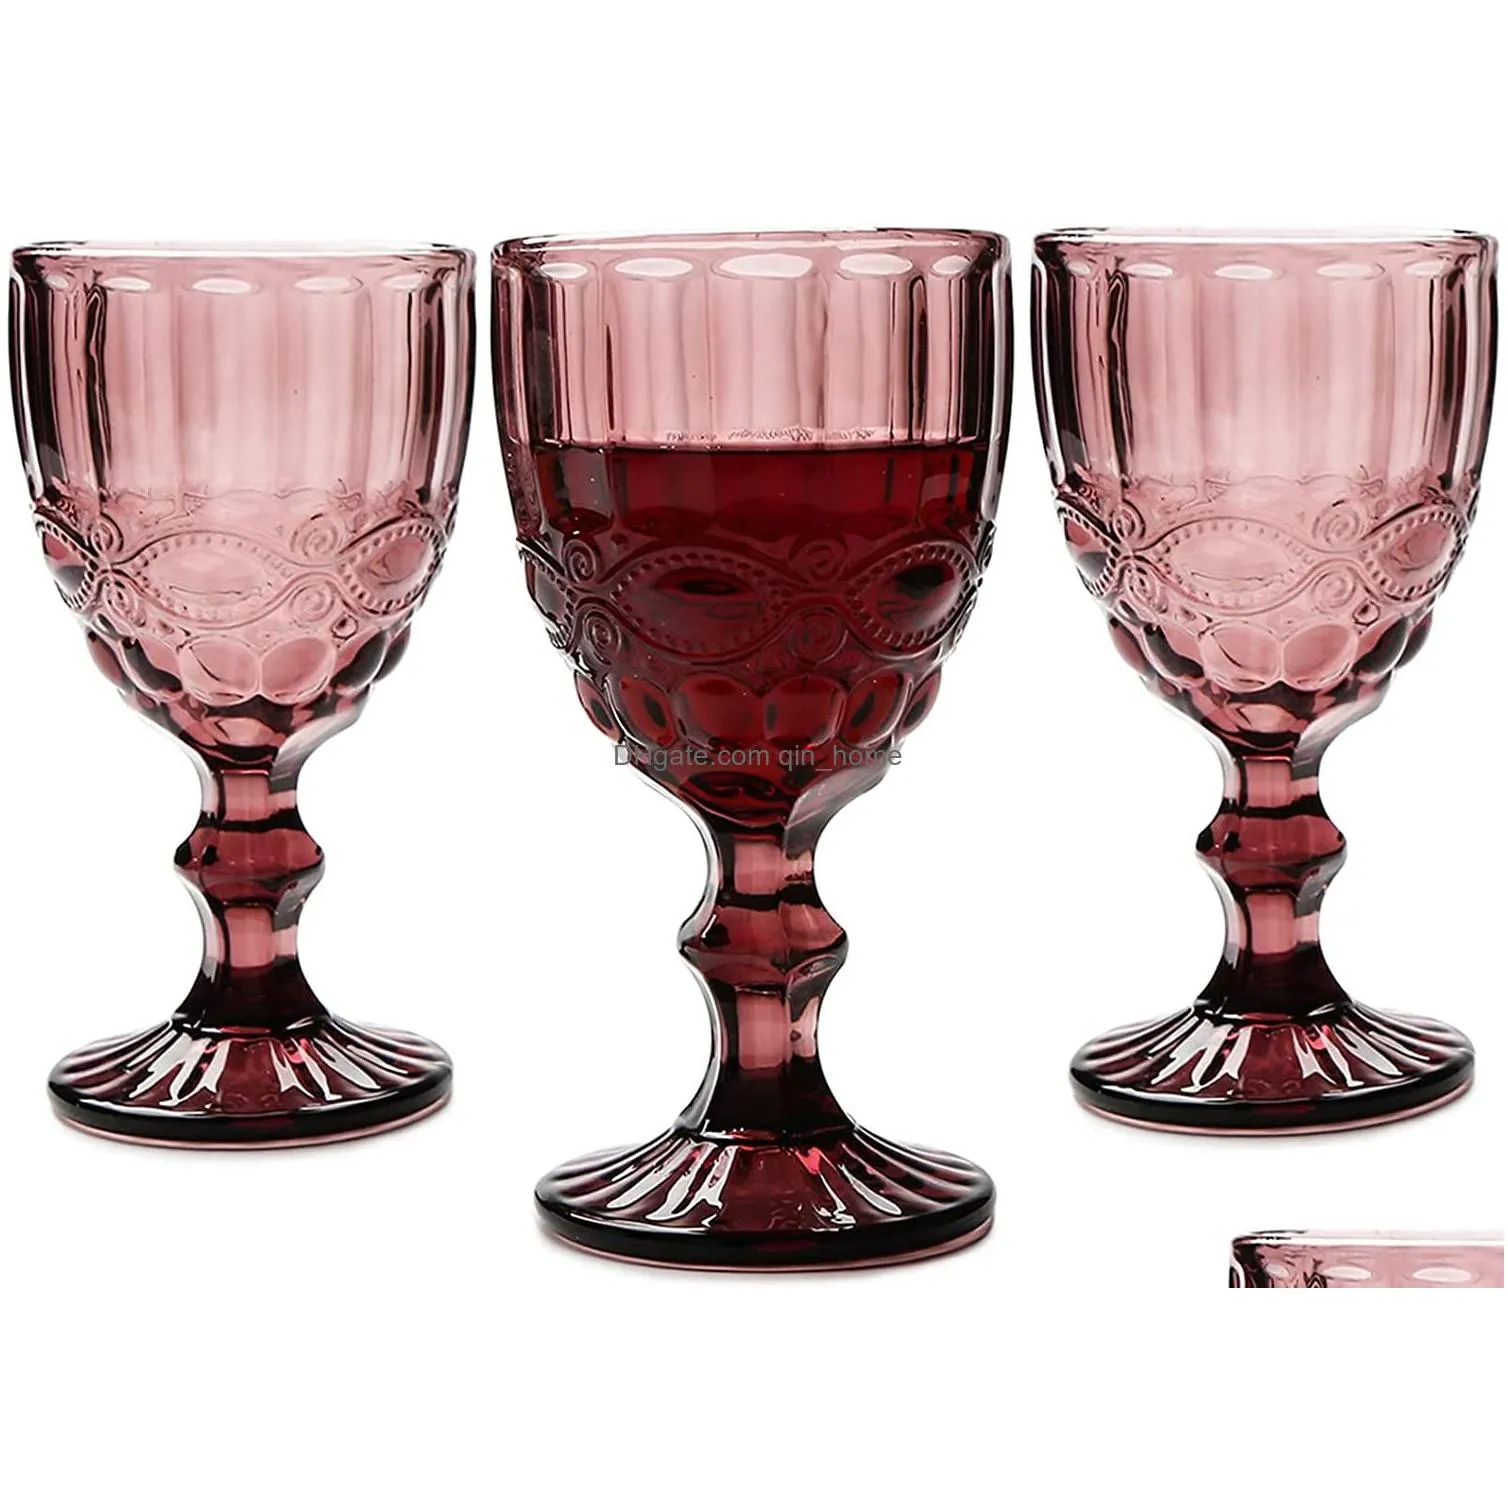 10oz wine glasses colored glass goblet with stem 300ml vintage pattern embossed romantic drinkware for party wedding fast